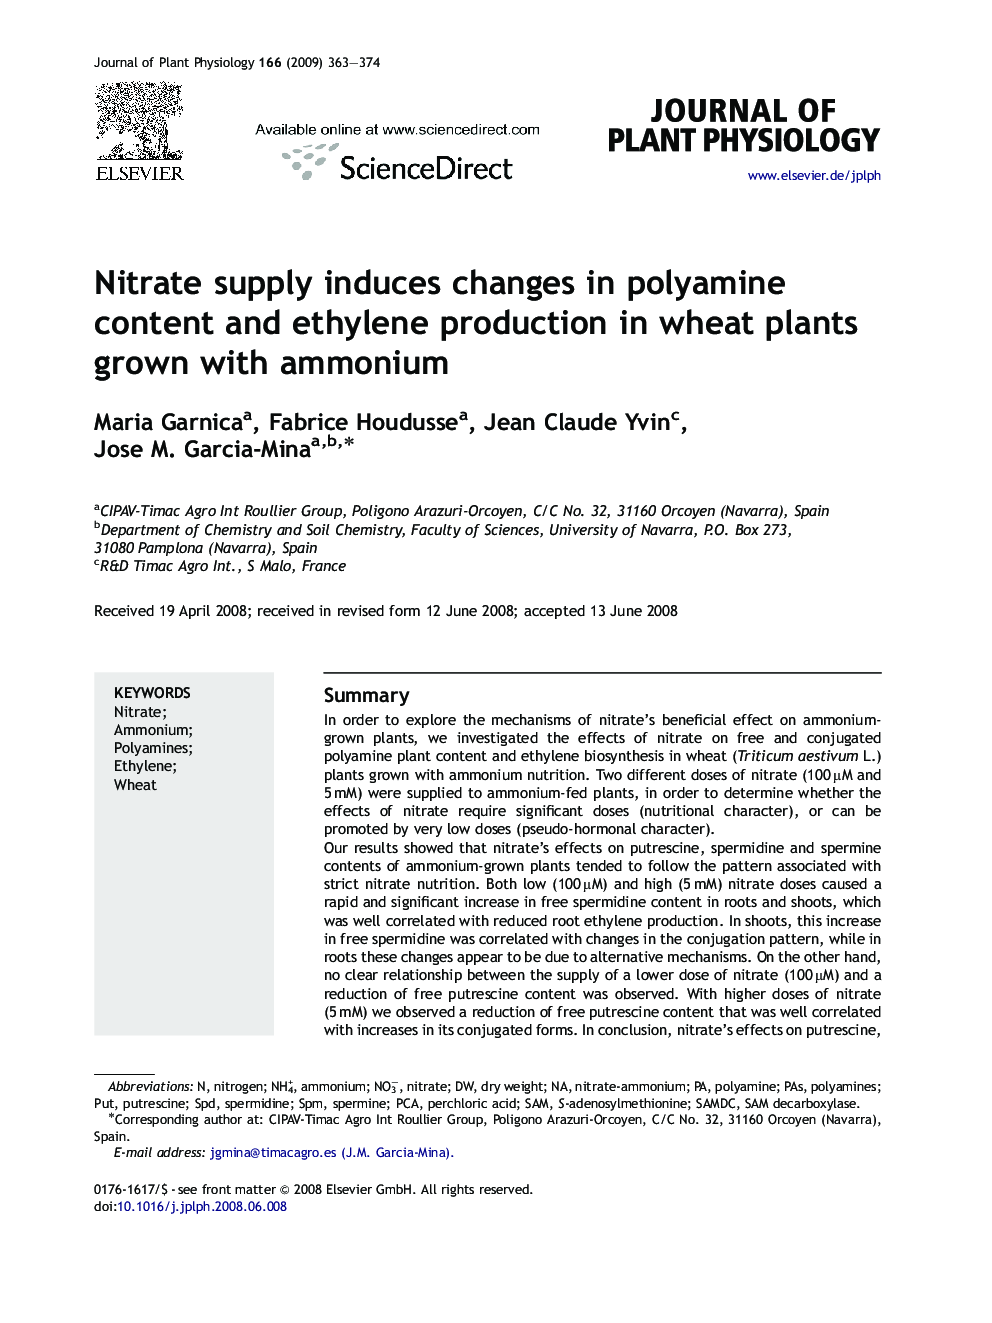 Nitrate supply induces changes in polyamine content and ethylene production in wheat plants grown with ammonium